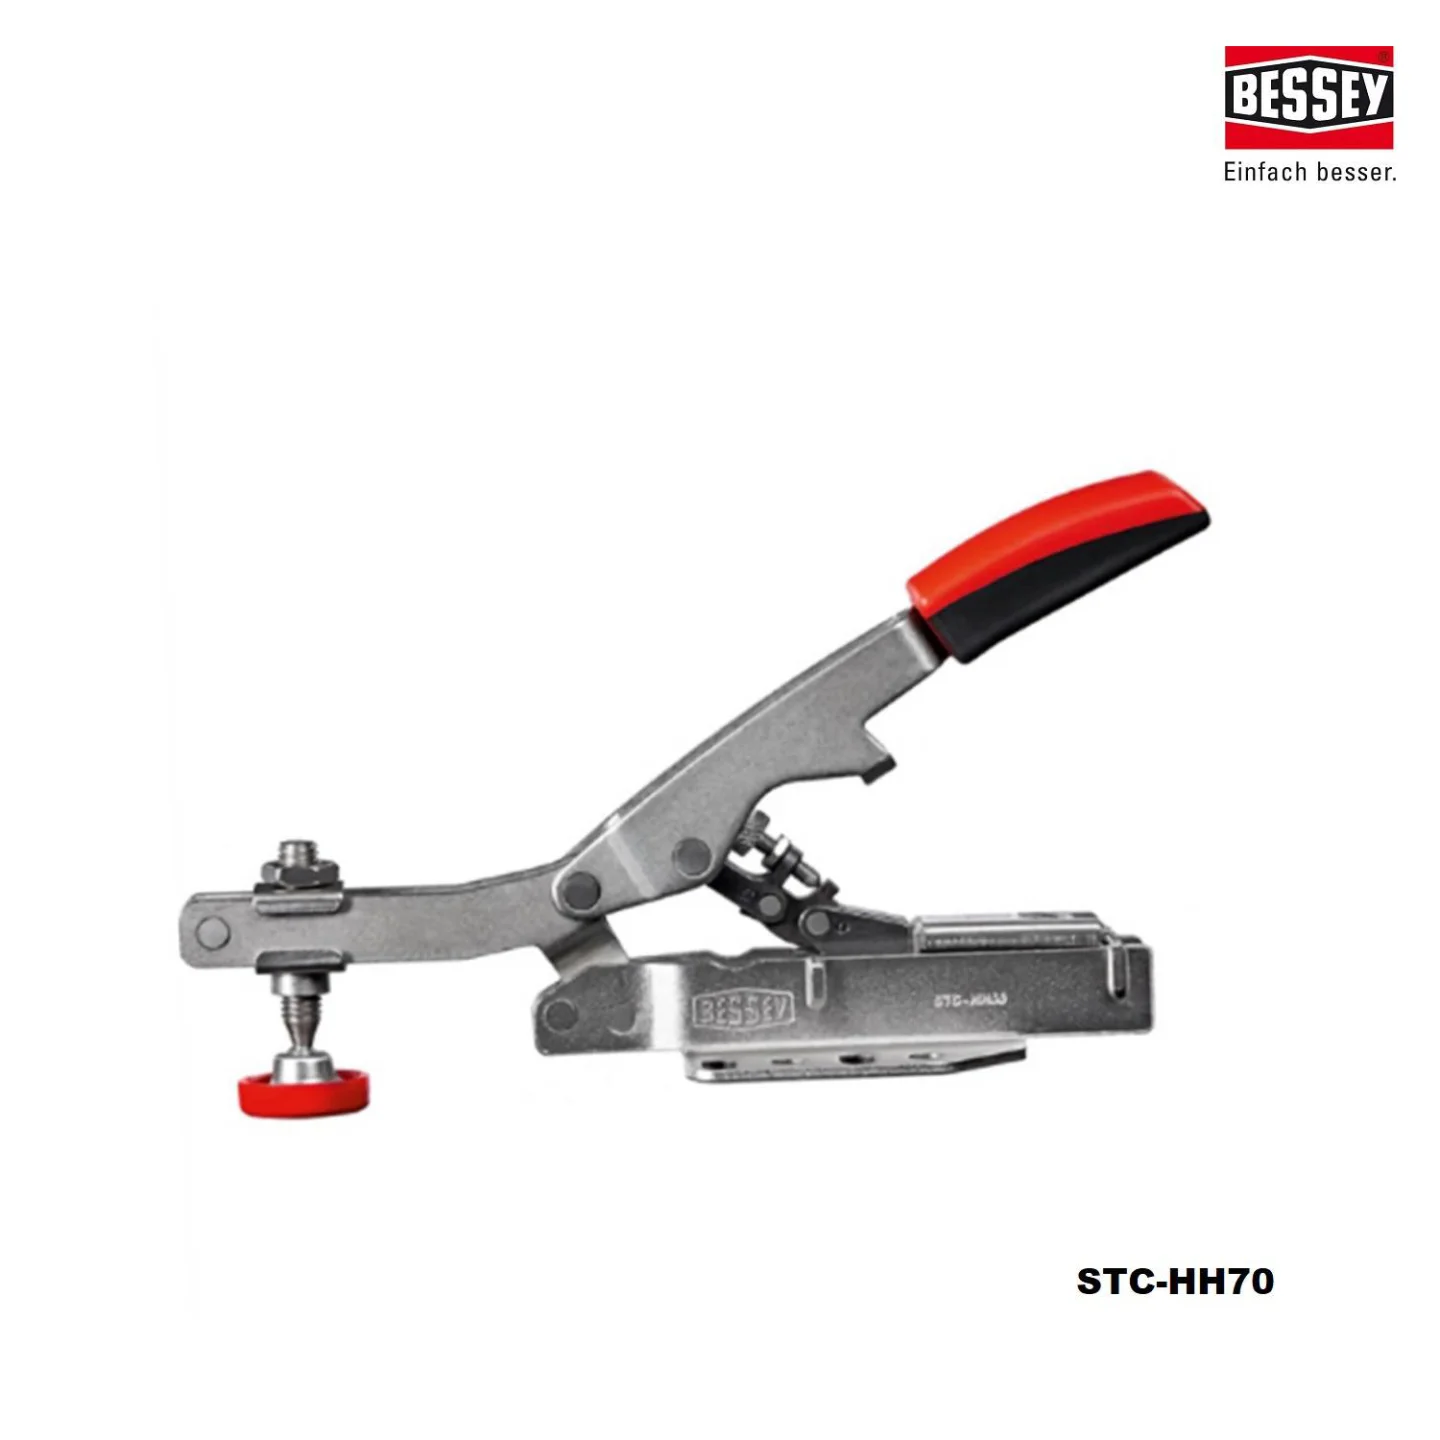 snelspanner_bessey_stc_hh70.